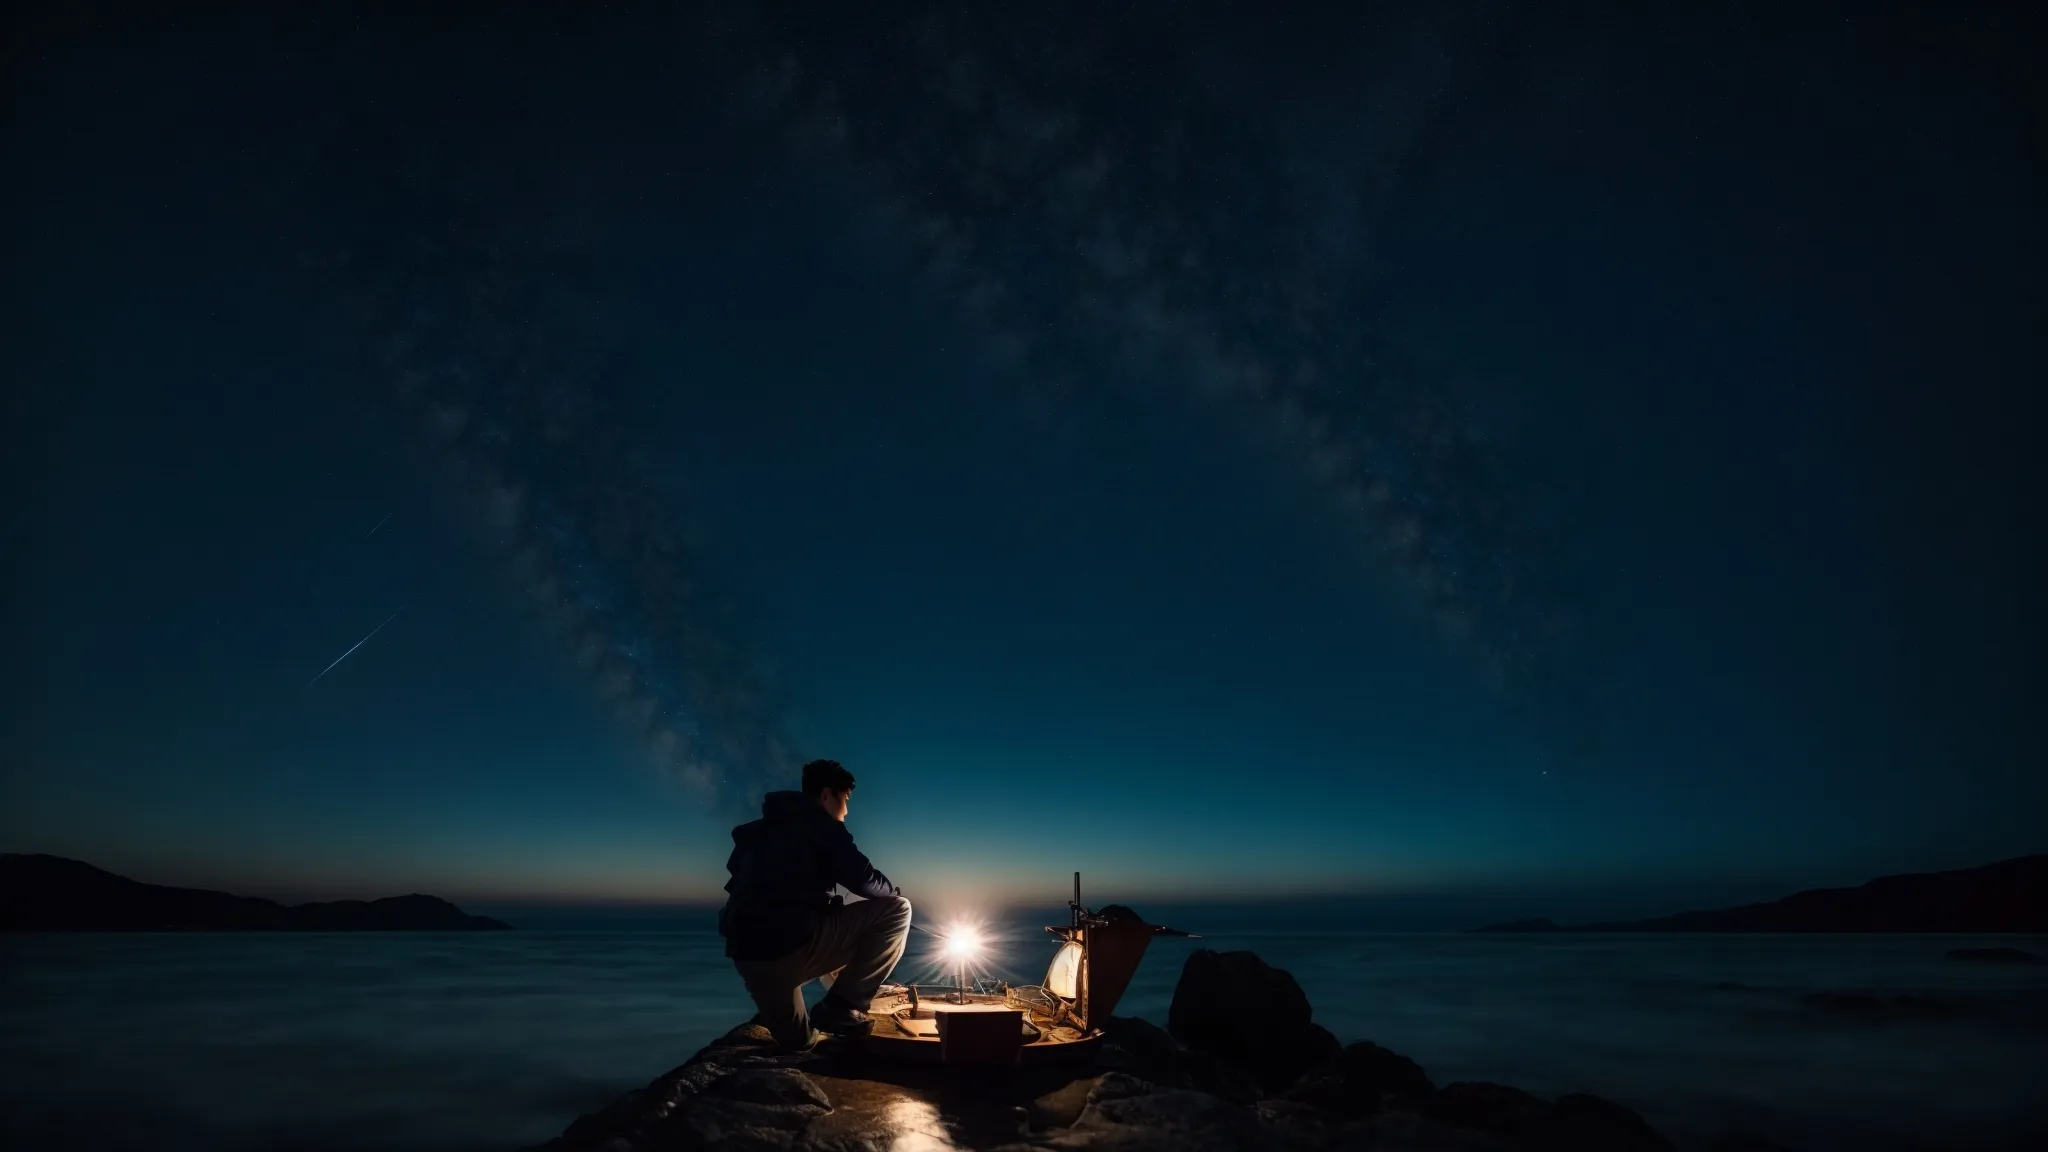 a sailor at a vast sea, navigating with a compass under a starry sky, symbolizes strategic exploration and discovery.